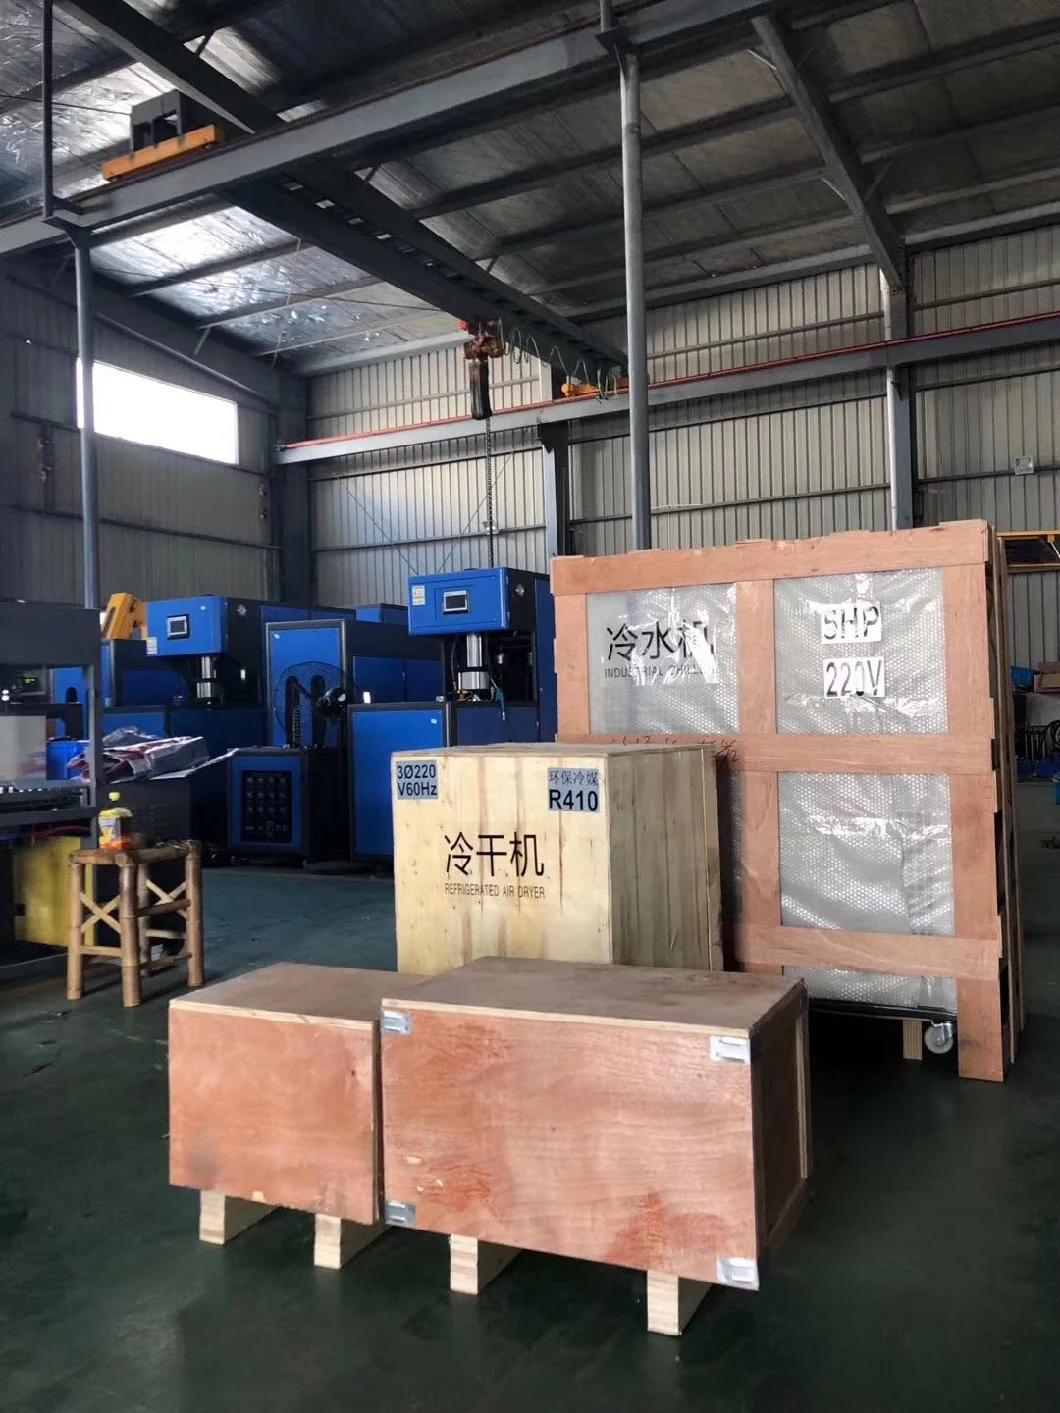 4 Cavities Semiautomatic Blow/Blowing Moulding/Molding Machine/Plastic Machine/Water Machine/Plastic Injection Molding Machine for Making Pet Bottles